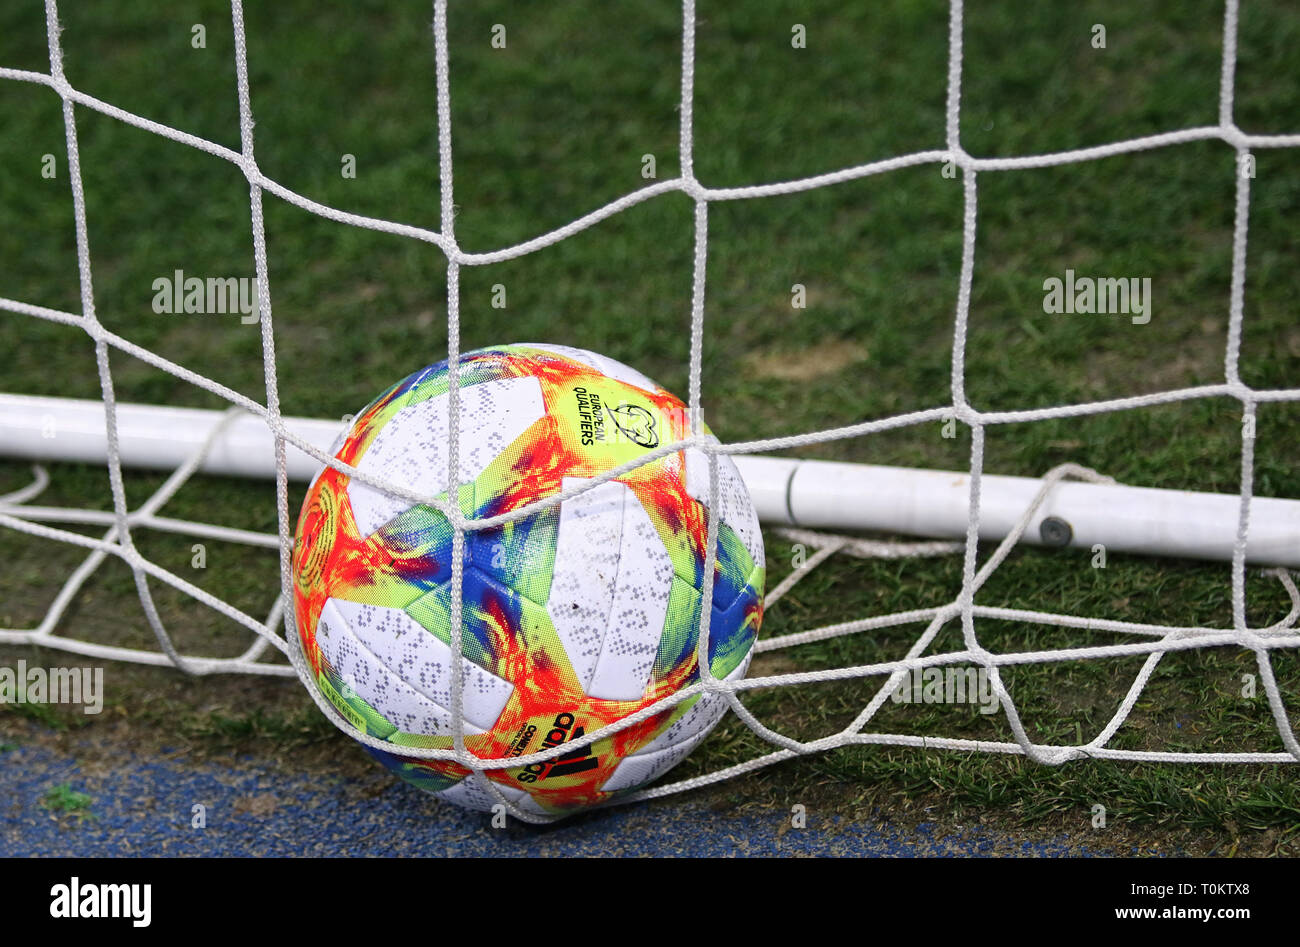 KYIV, UKRAINE - MARCH 18, 2019: Official UEFA EURO-2020 Qualifiers match ball Adidas Conext19 in the gate during the Open training session of Ukraine  Stock Photo